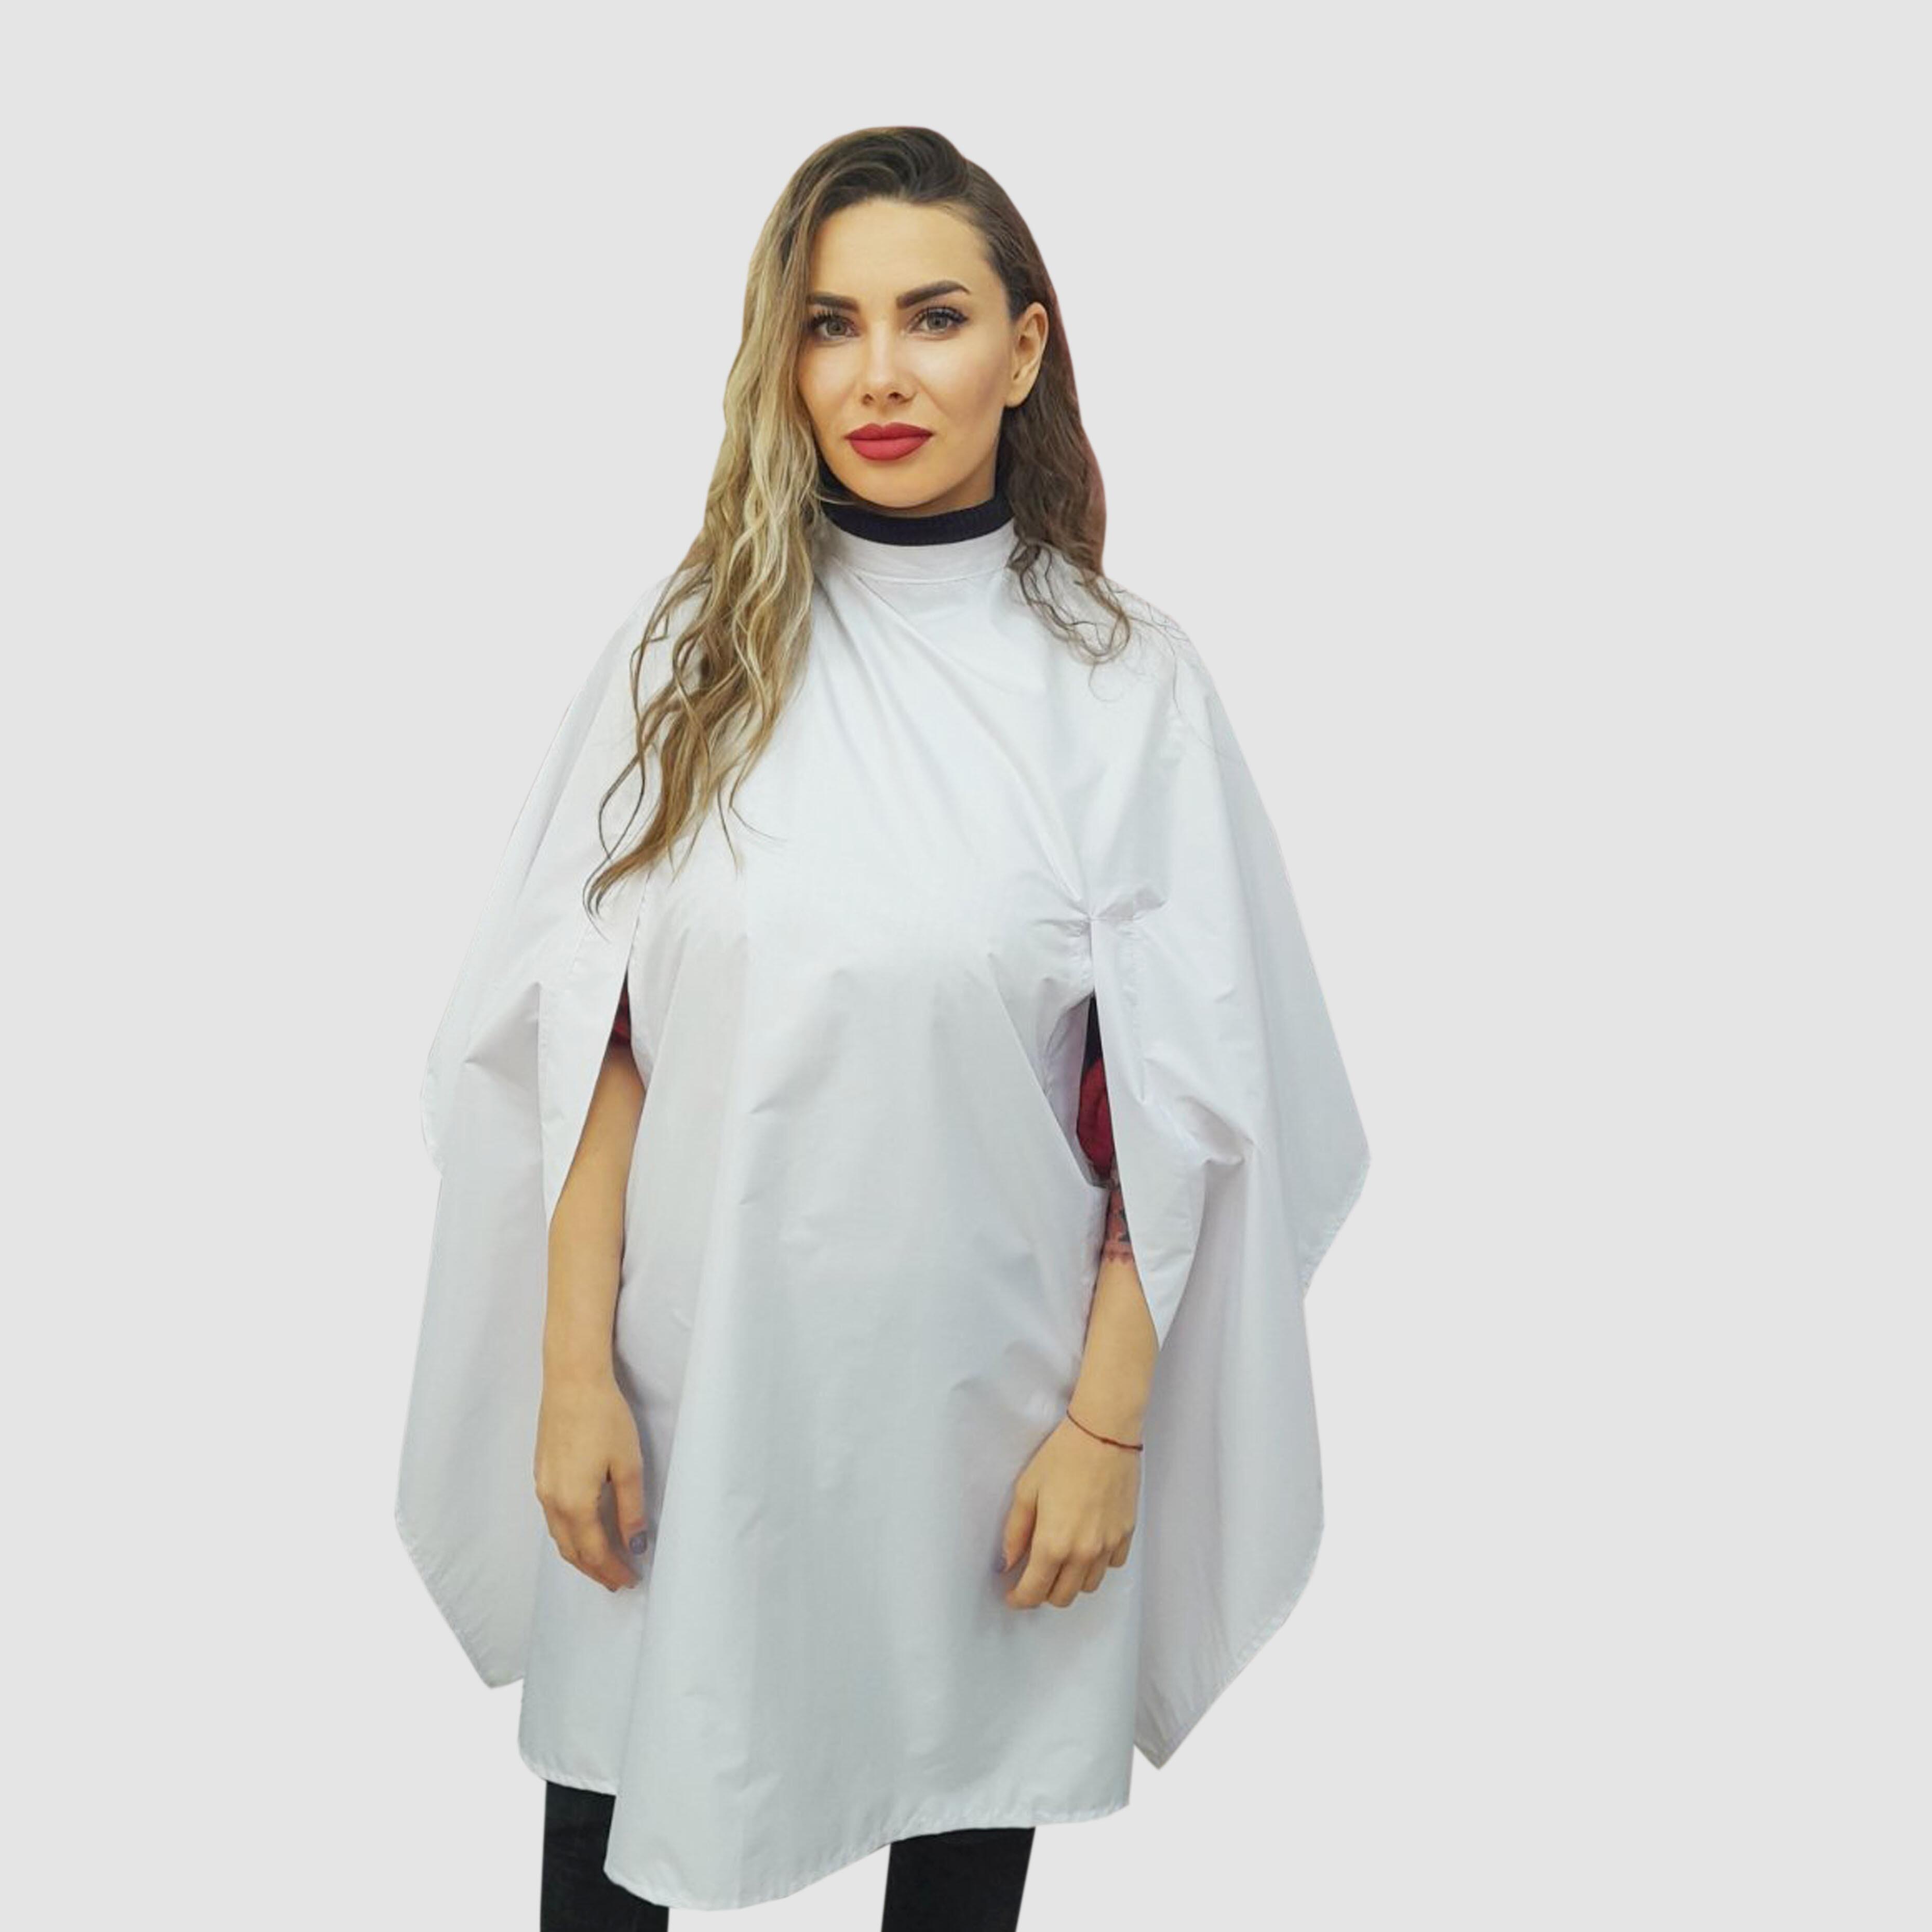 Nibano hairdressing gown with handsplits & poppers white